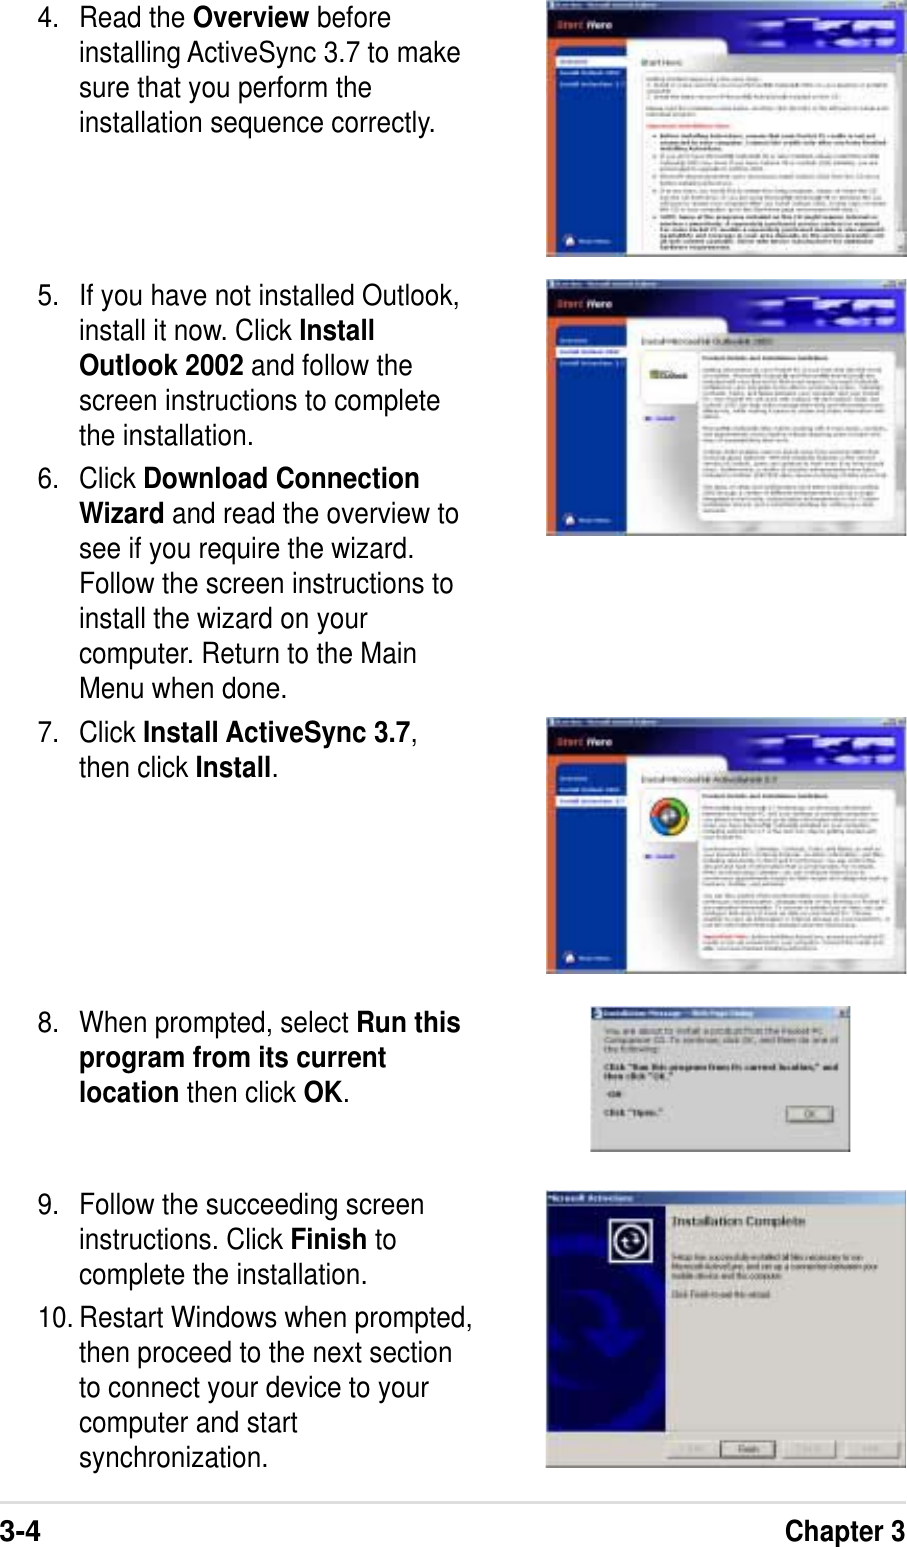 3-4Chapter 34. Read the Overview beforeinstalling ActiveSync 3.7 to makesure that you perform theinstallation sequence correctly.5. If you have not installed Outlook,install it now. Click InstallOutlook 2002 and follow thescreen instructions to completethe installation.6. Click Download ConnectionWizard and read the overview tosee if you require the wizard.Follow the screen instructions toinstall the wizard on yourcomputer. Return to the MainMenu when done.7. Click Install ActiveSync 3.7,then click Install.8. When prompted, select Run thisprogram from its currentlocation then click OK.9. Follow the succeeding screeninstructions. Click Finish tocomplete the installation.10. Restart Windows when prompted,then proceed to the next sectionto connect your device to yourcomputer and startsynchronization.